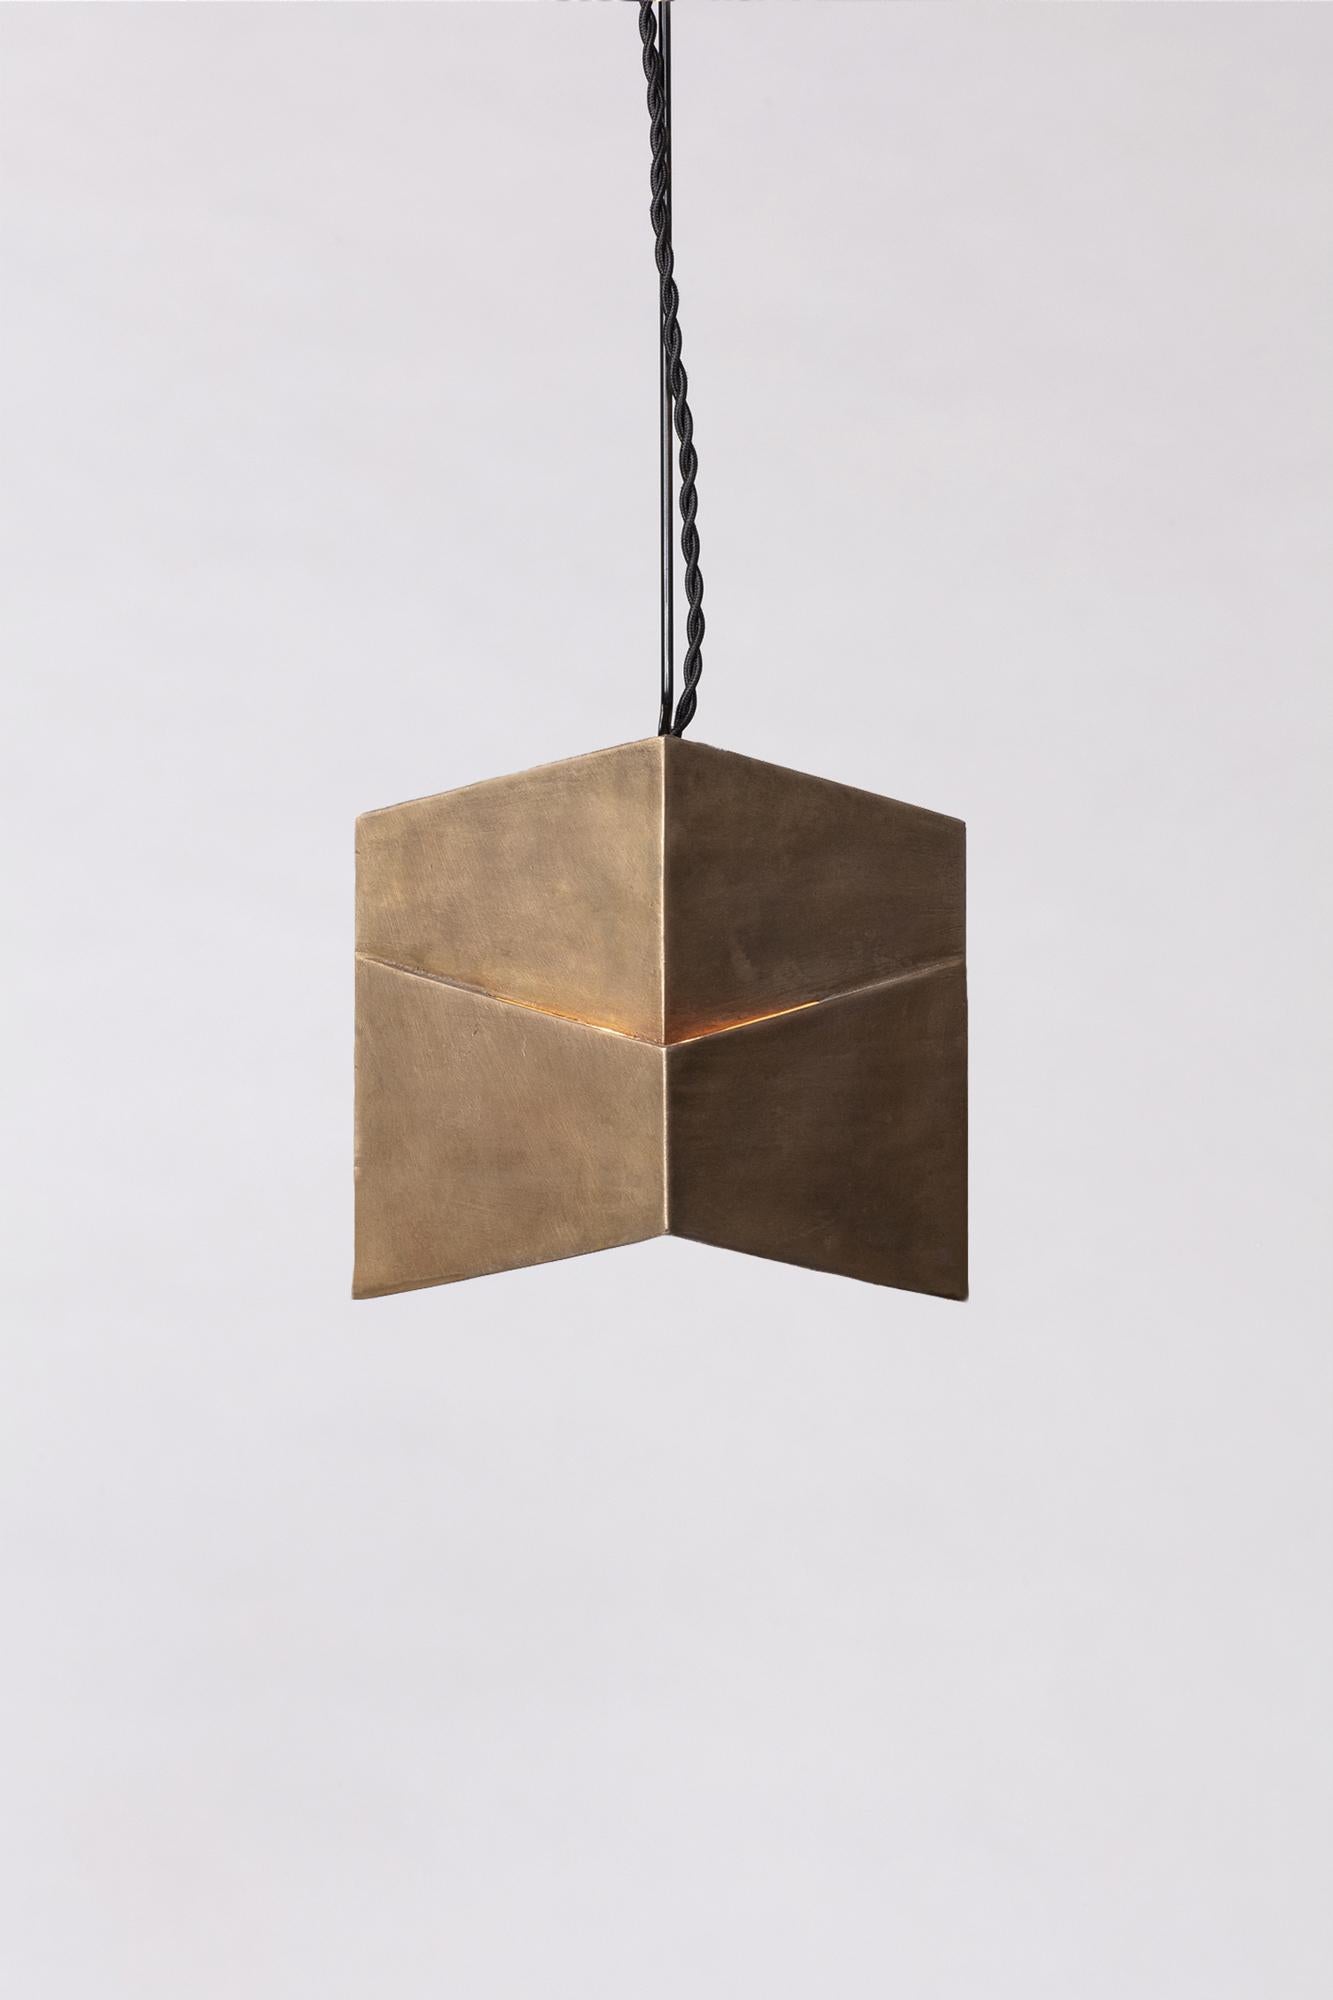 
The Decade is a solid brass pendant made with the lost wax casting technique by a local foundry. It is reminiscent of the California architecture of Rudolf Schindler and that of the Bauhaus. Indoors or outdoors, wired with a twisted natural or